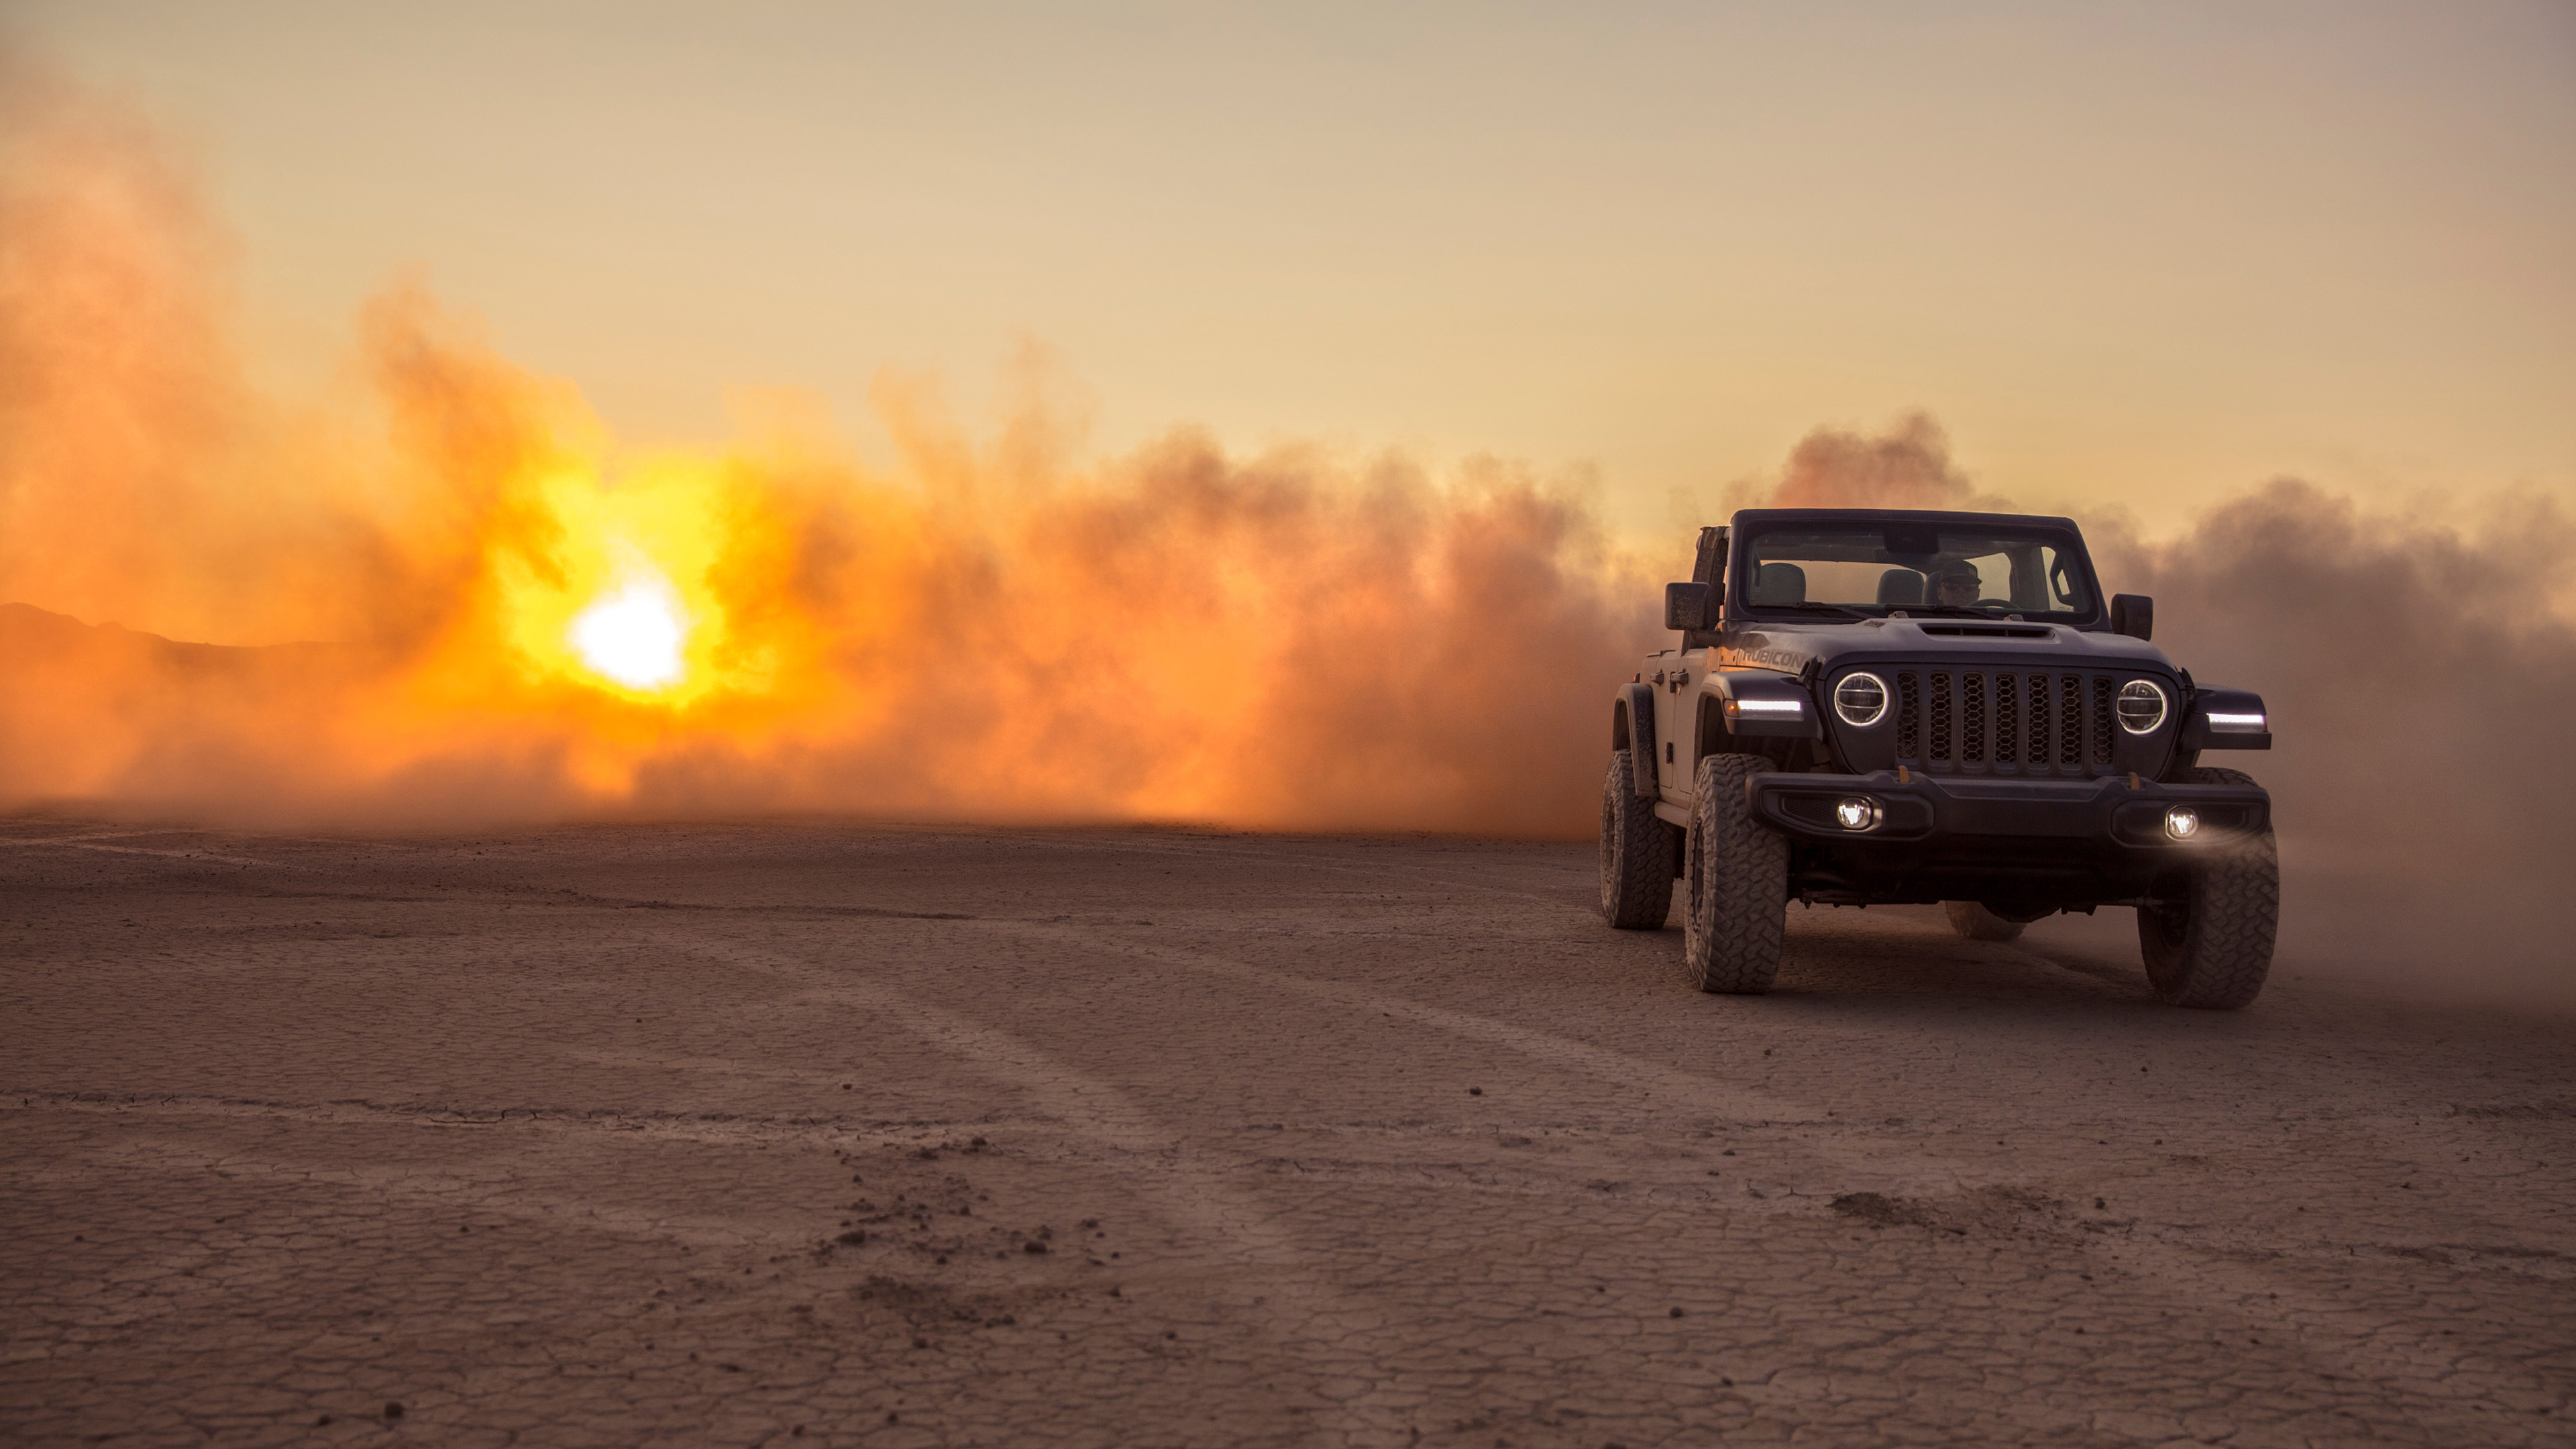 Jeep 4K wallpapers for your desktop or mobile screen free and easy to  download